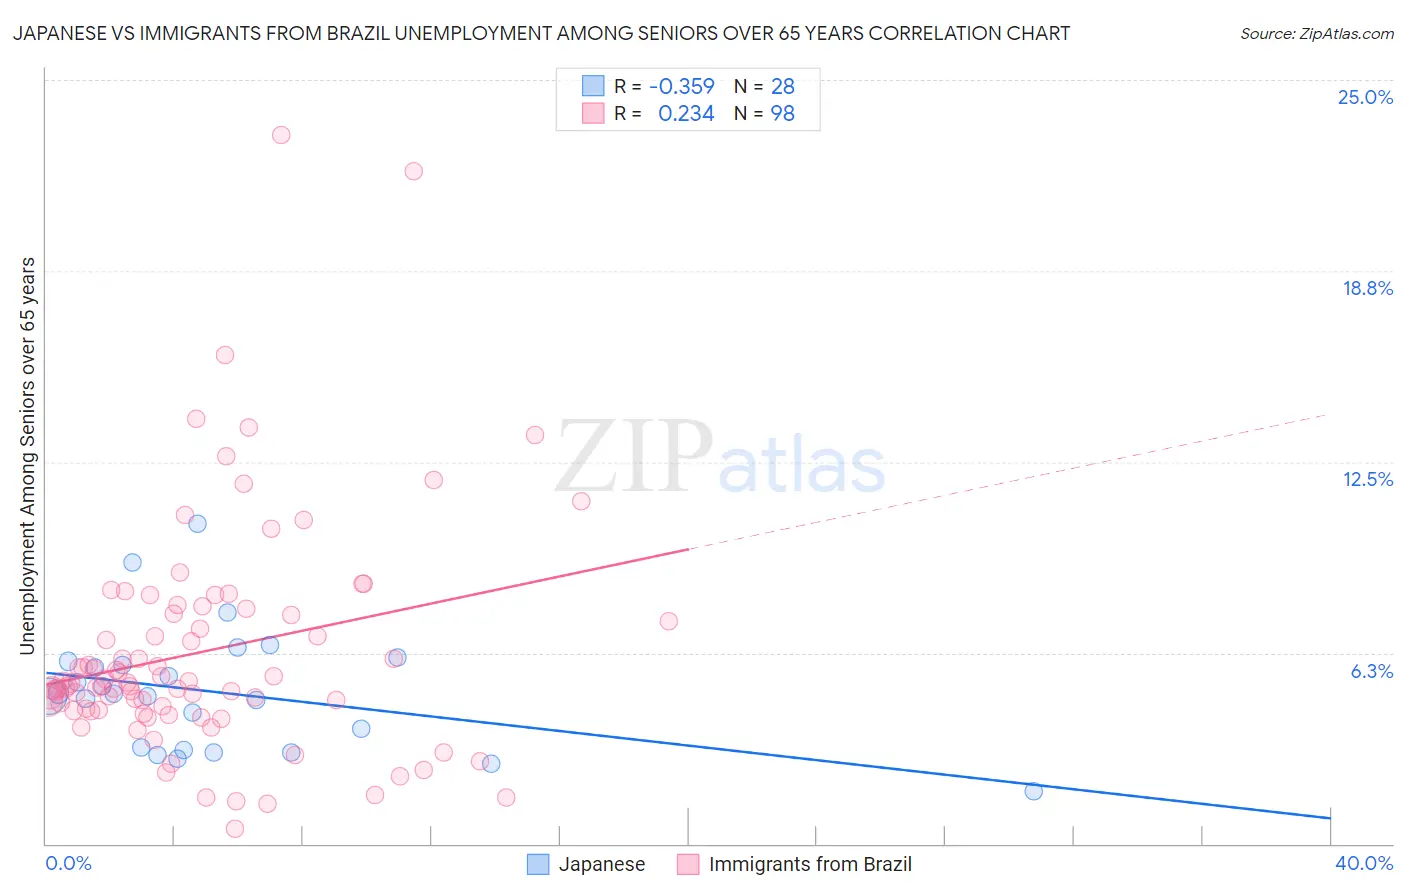 Japanese vs Immigrants from Brazil Unemployment Among Seniors over 65 years